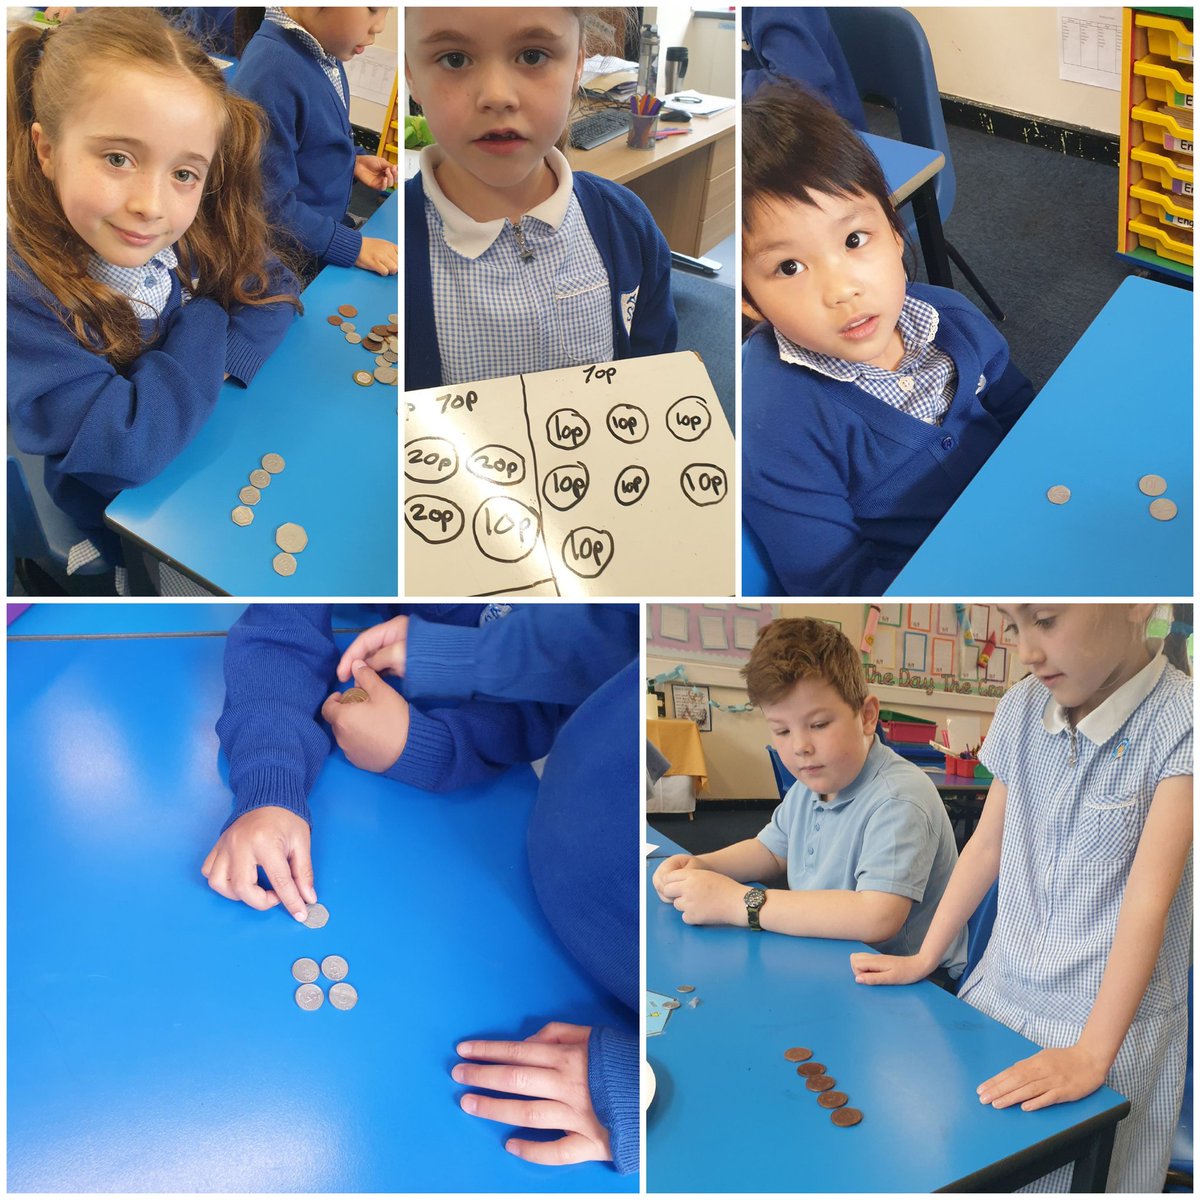 Year 2 have been enjoying some practical maths with money. The children have been working together to see how many different ways they can make the same amount. Some children even managed to find 4 different ways to find some amounts!
#money
#problemsolvingskills